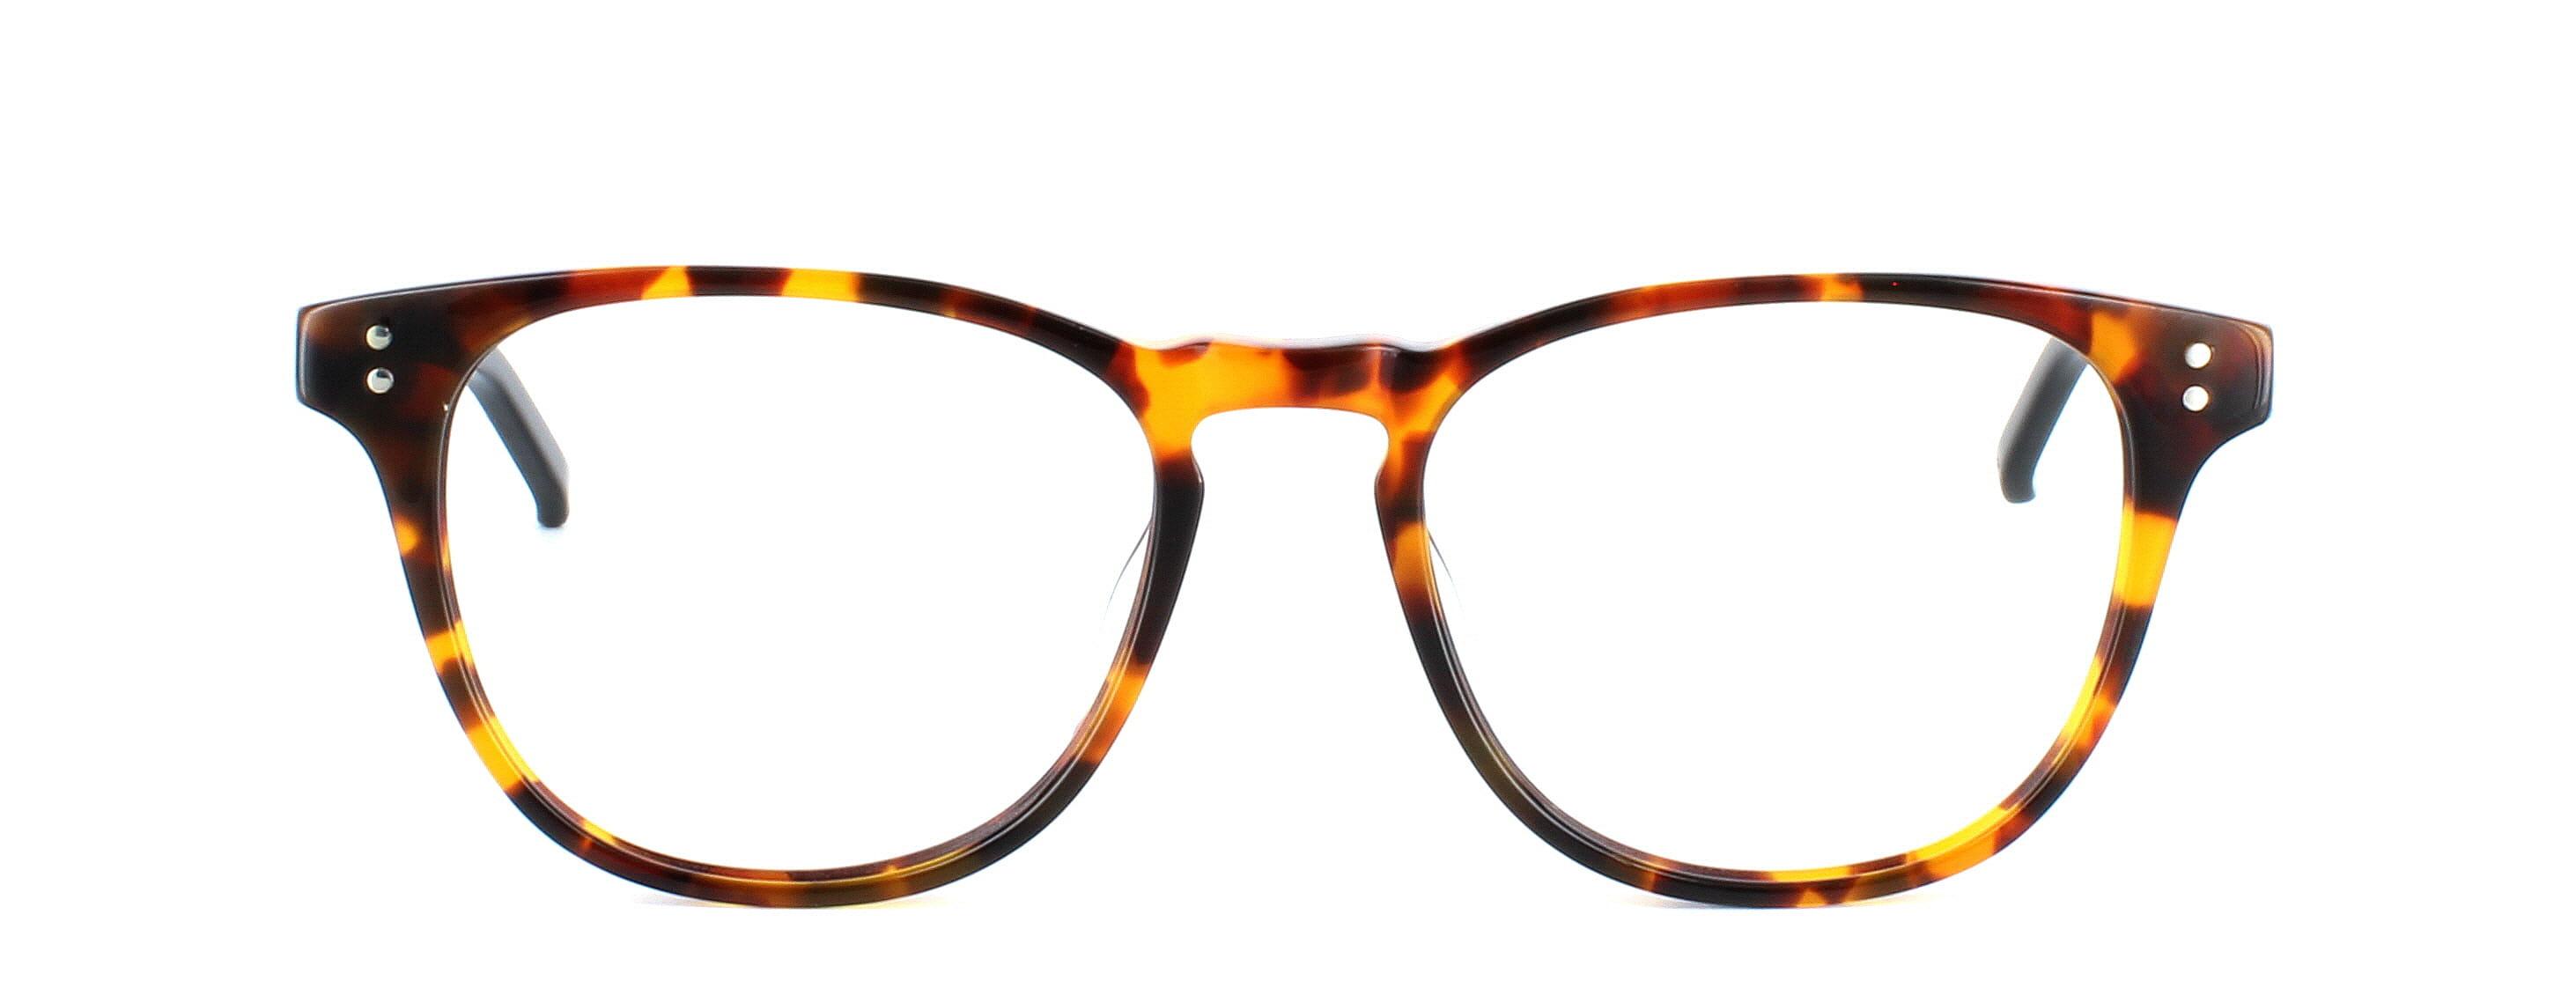 Hackett HEB 213 - Unisex acetate with tortoise face and black arms - image view 5